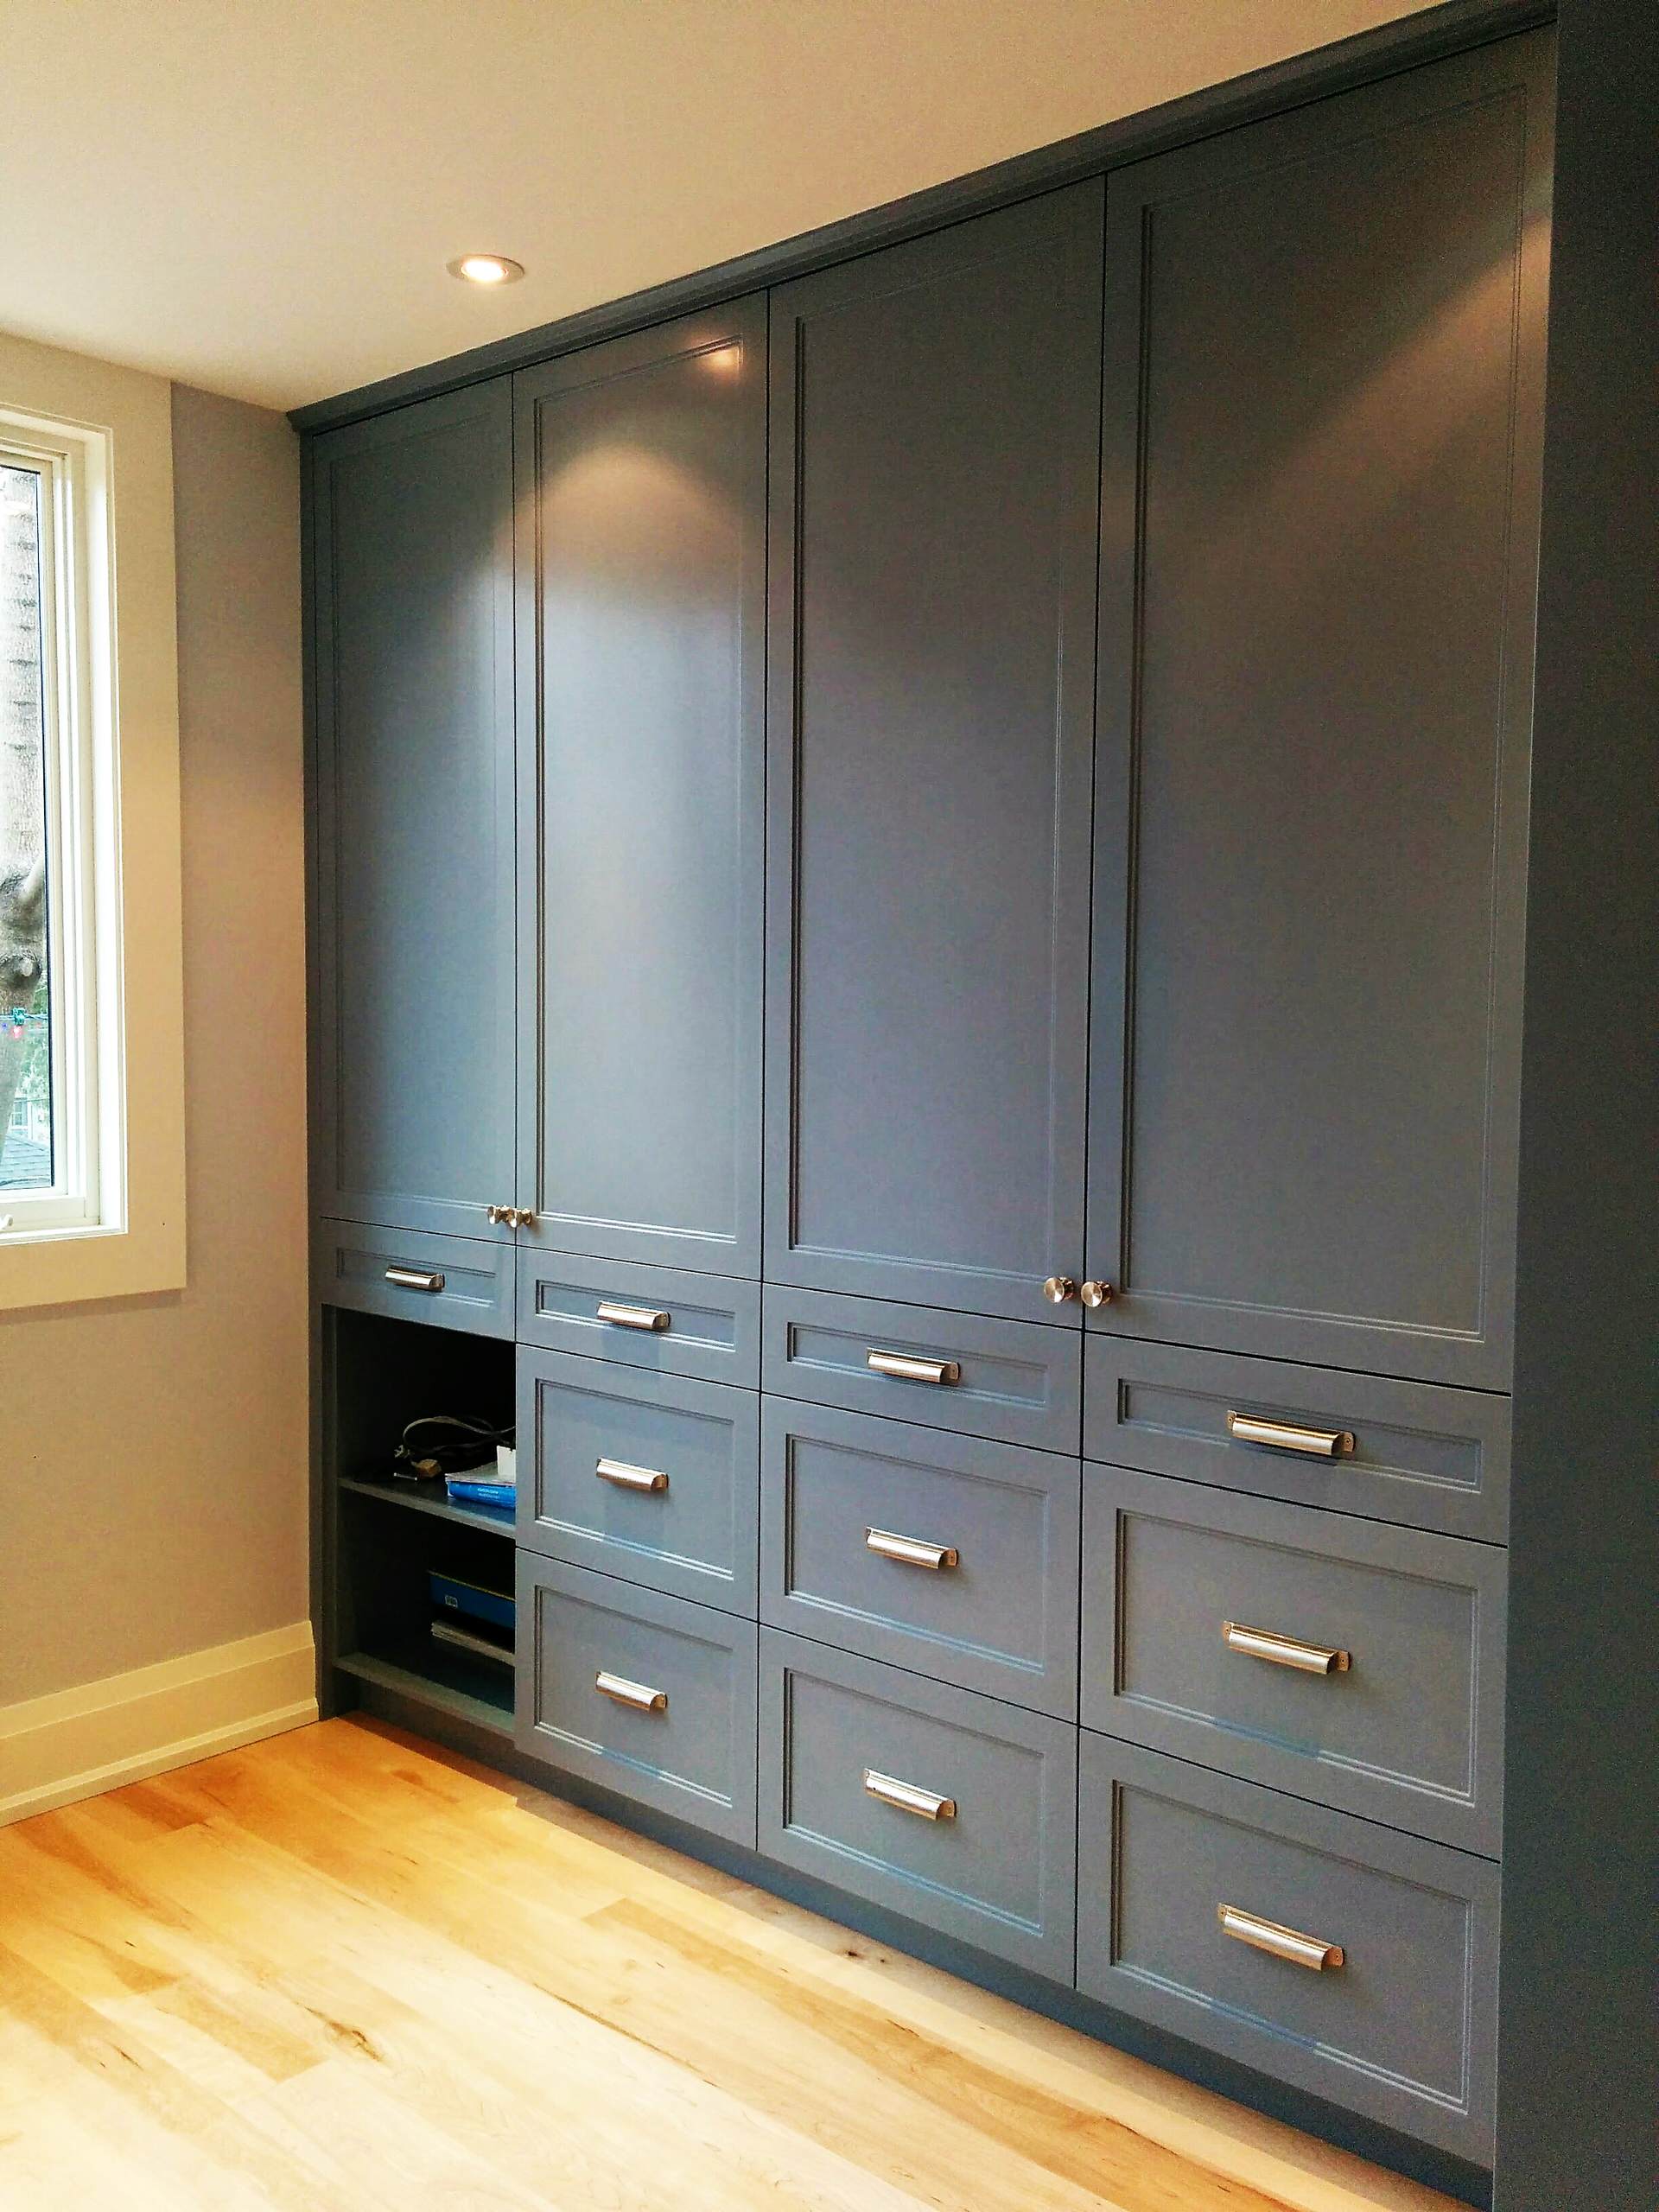 Built-in Storage in Home Office